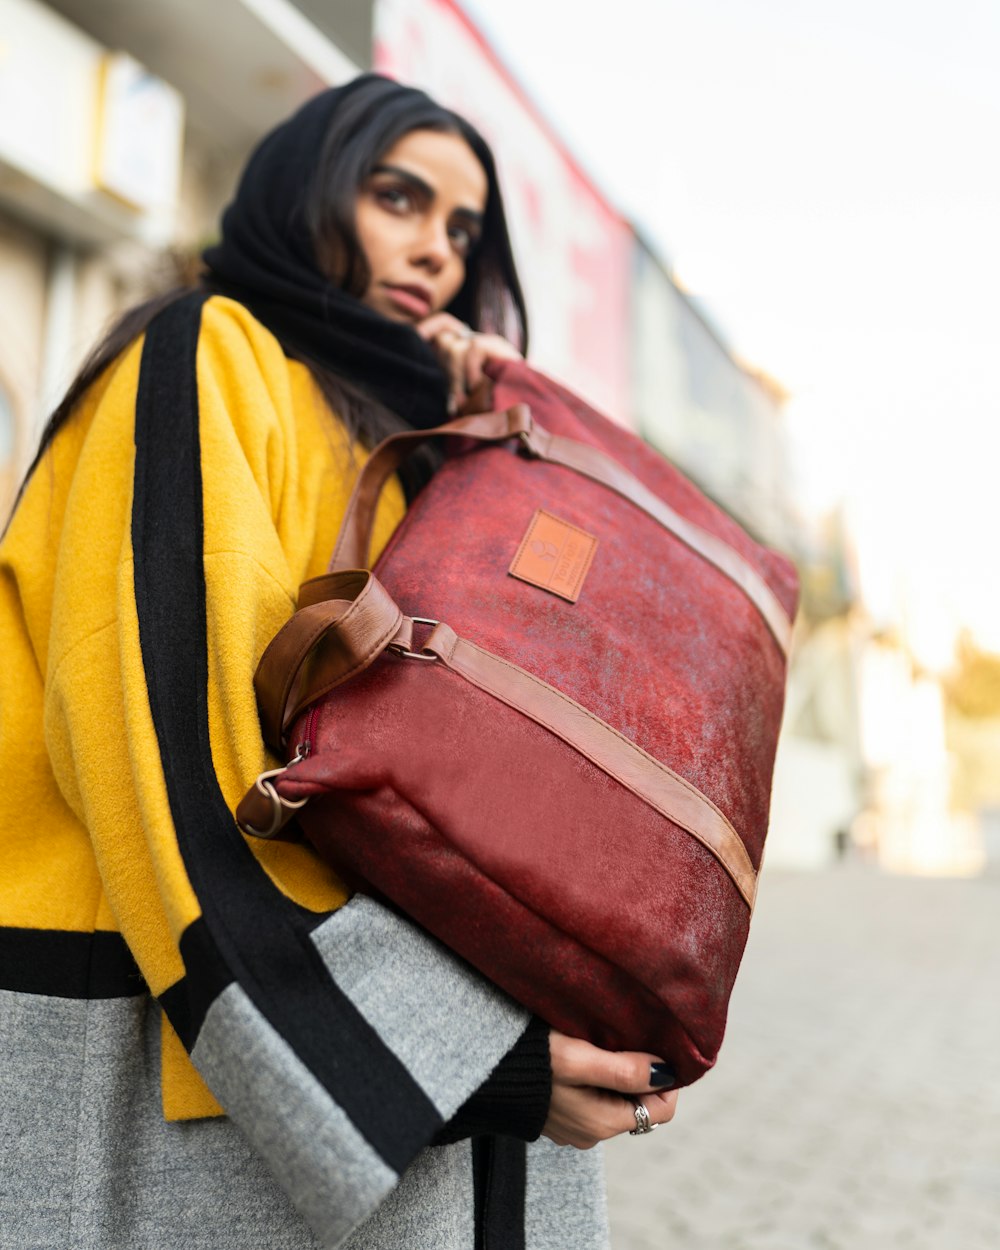 woman in yellow and black coat carrying red leather handbag